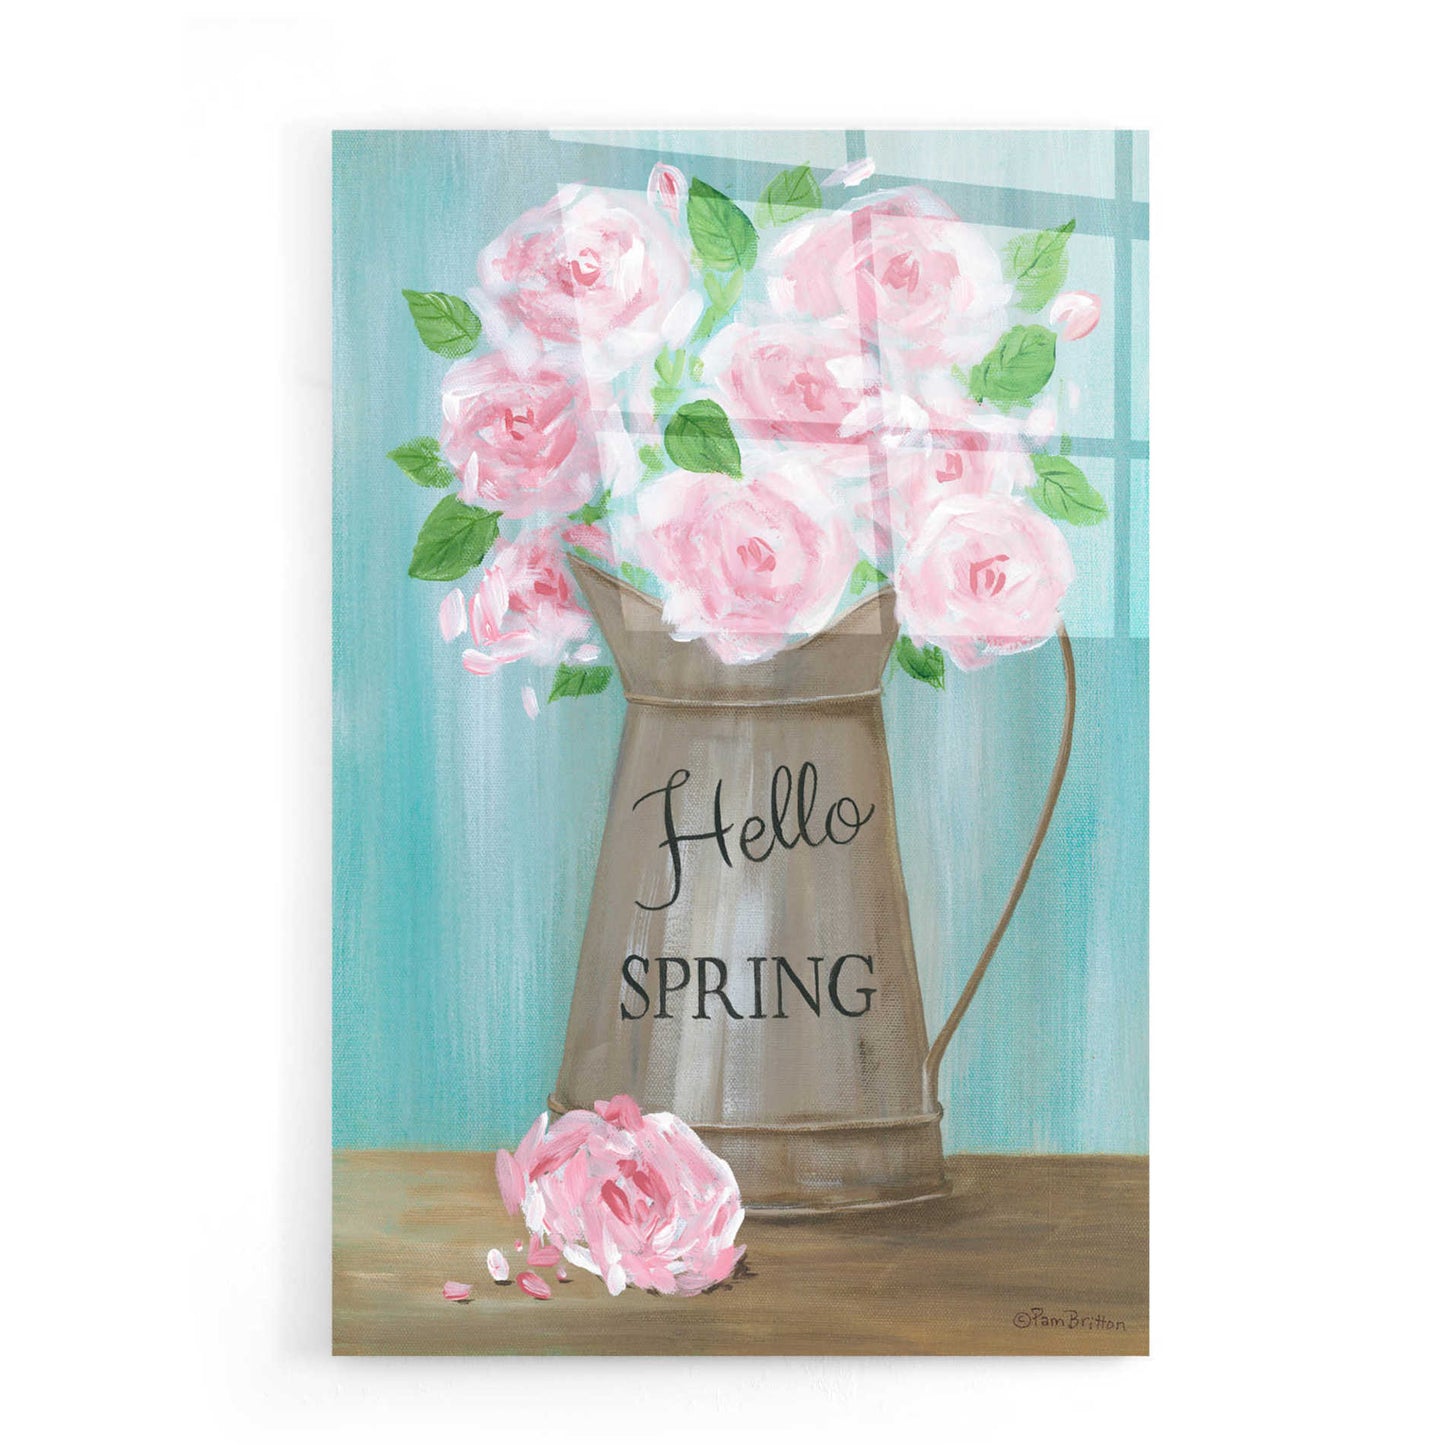 Epic Art 'Hello Spring Roses' by Pam Britton, Acrylic Glass Wall Art,16x24